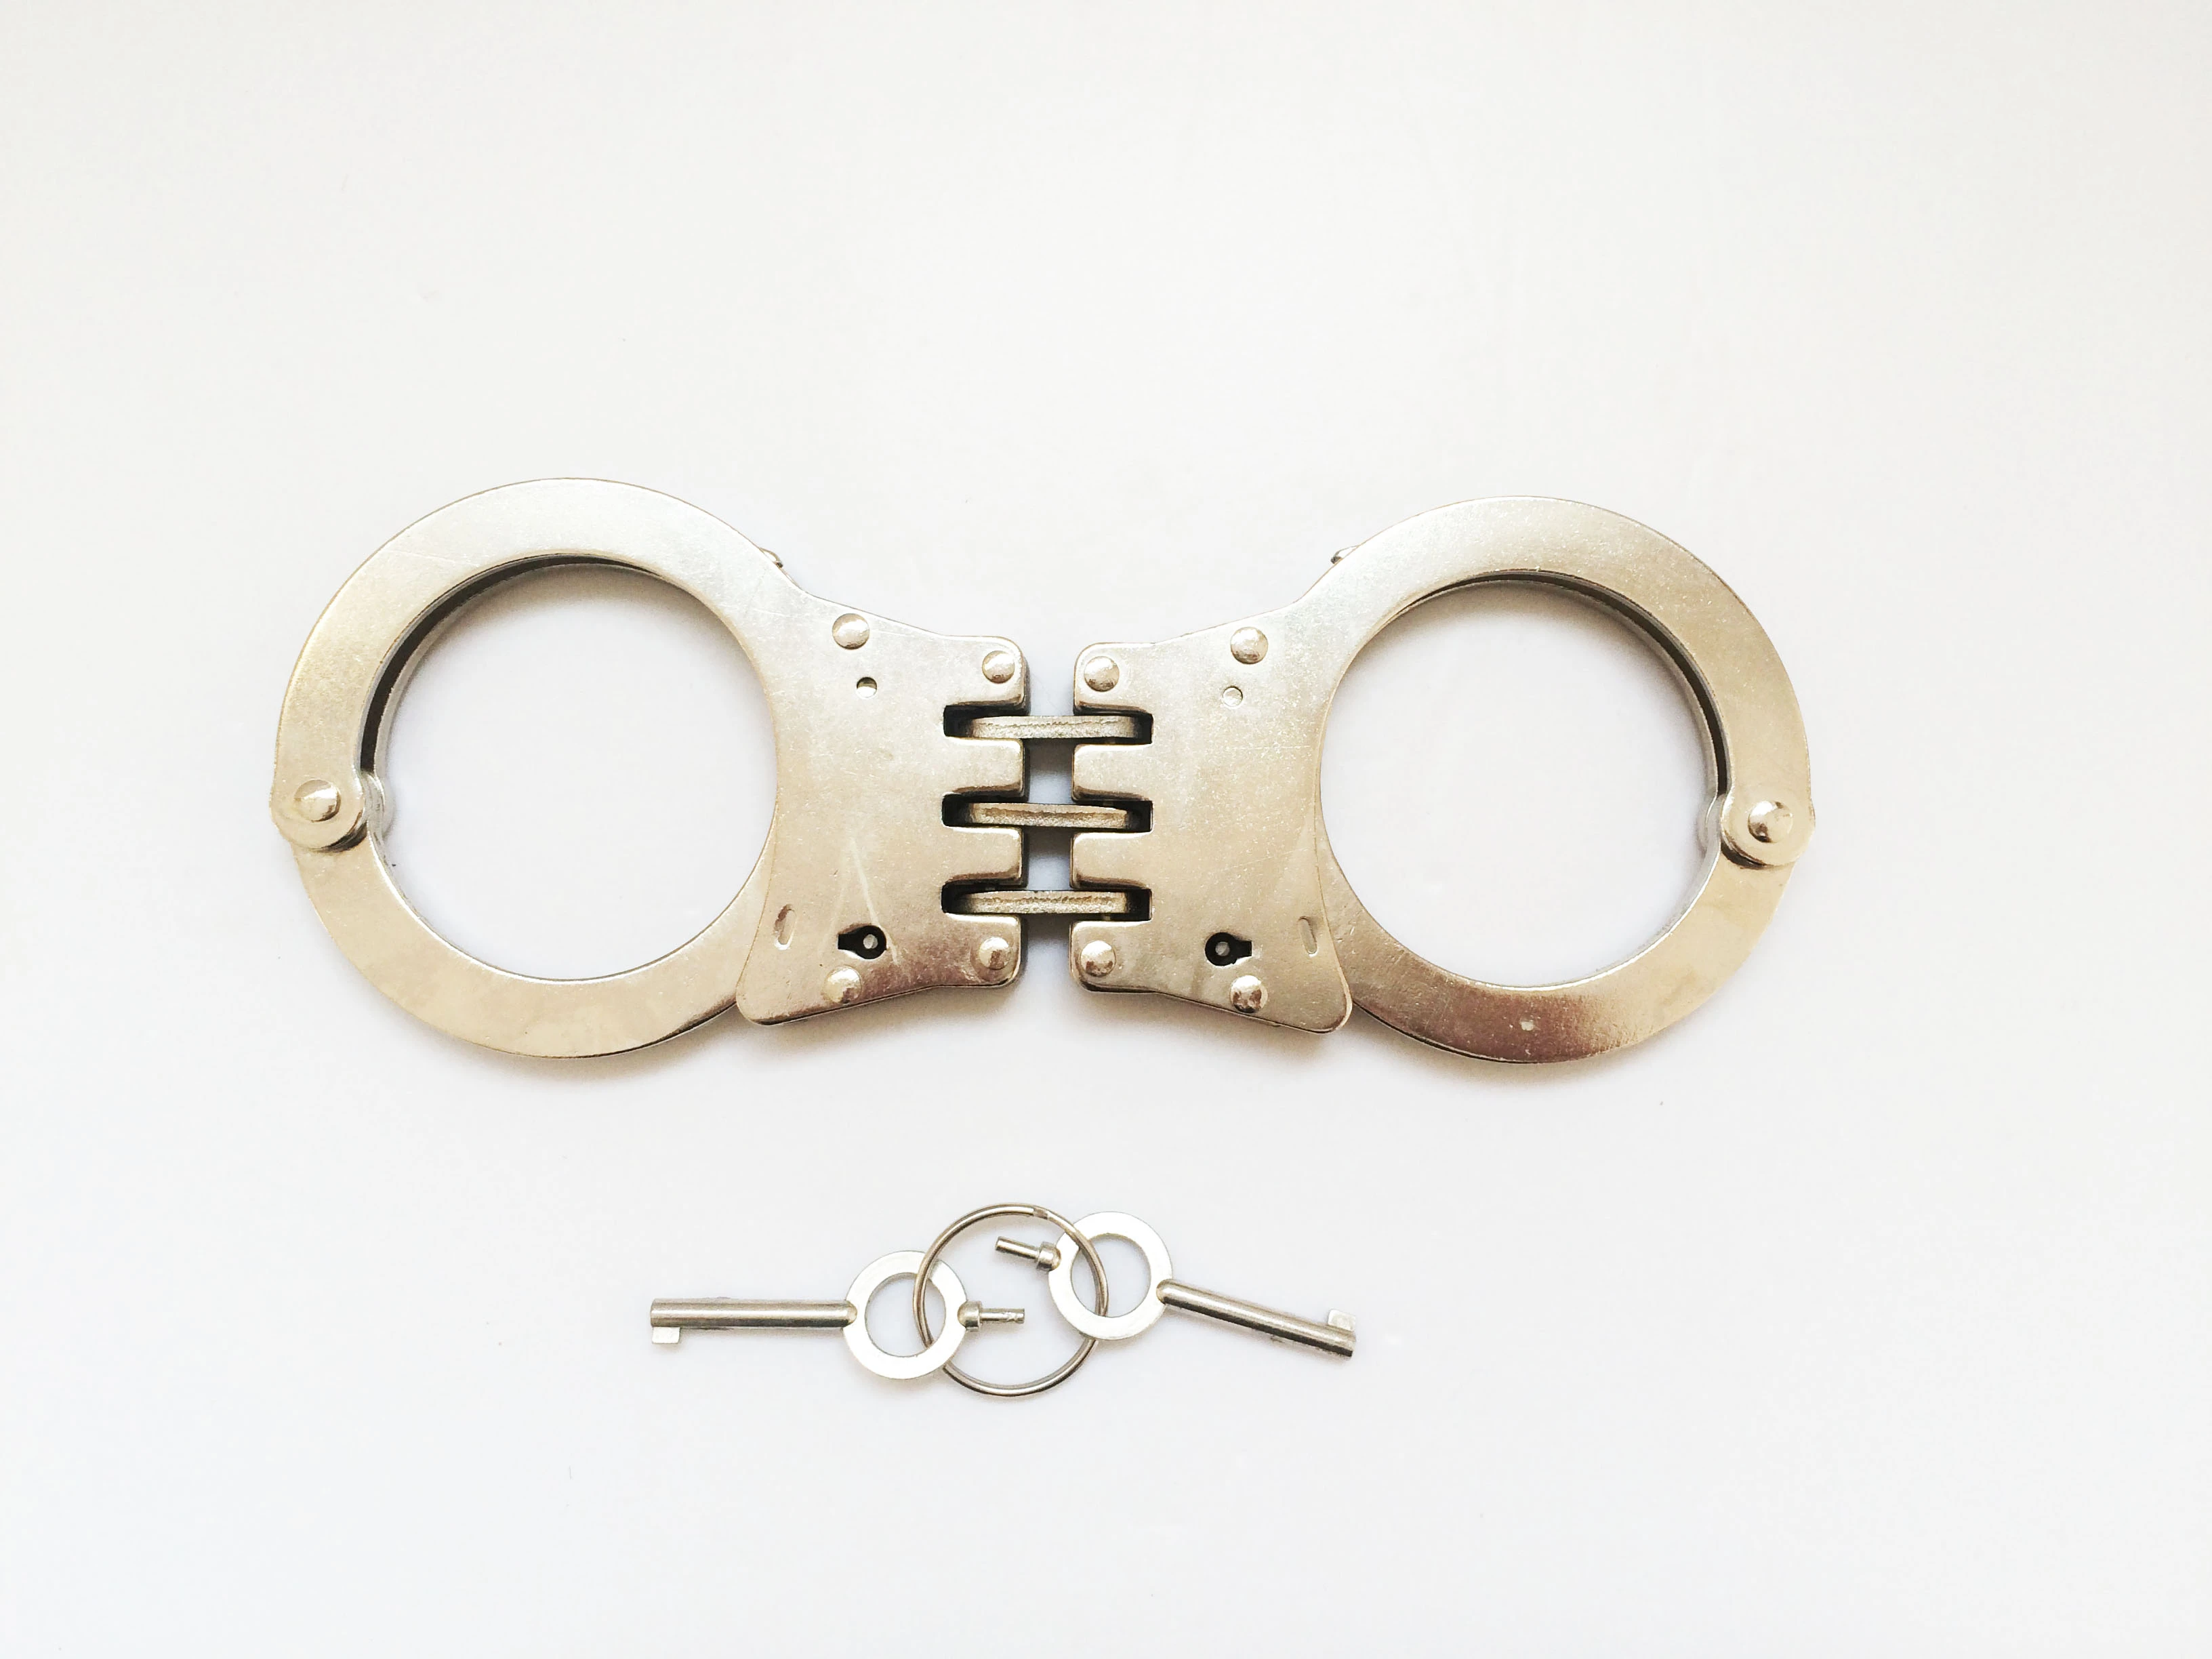 Double lock police hand cuff hinged handcuffs